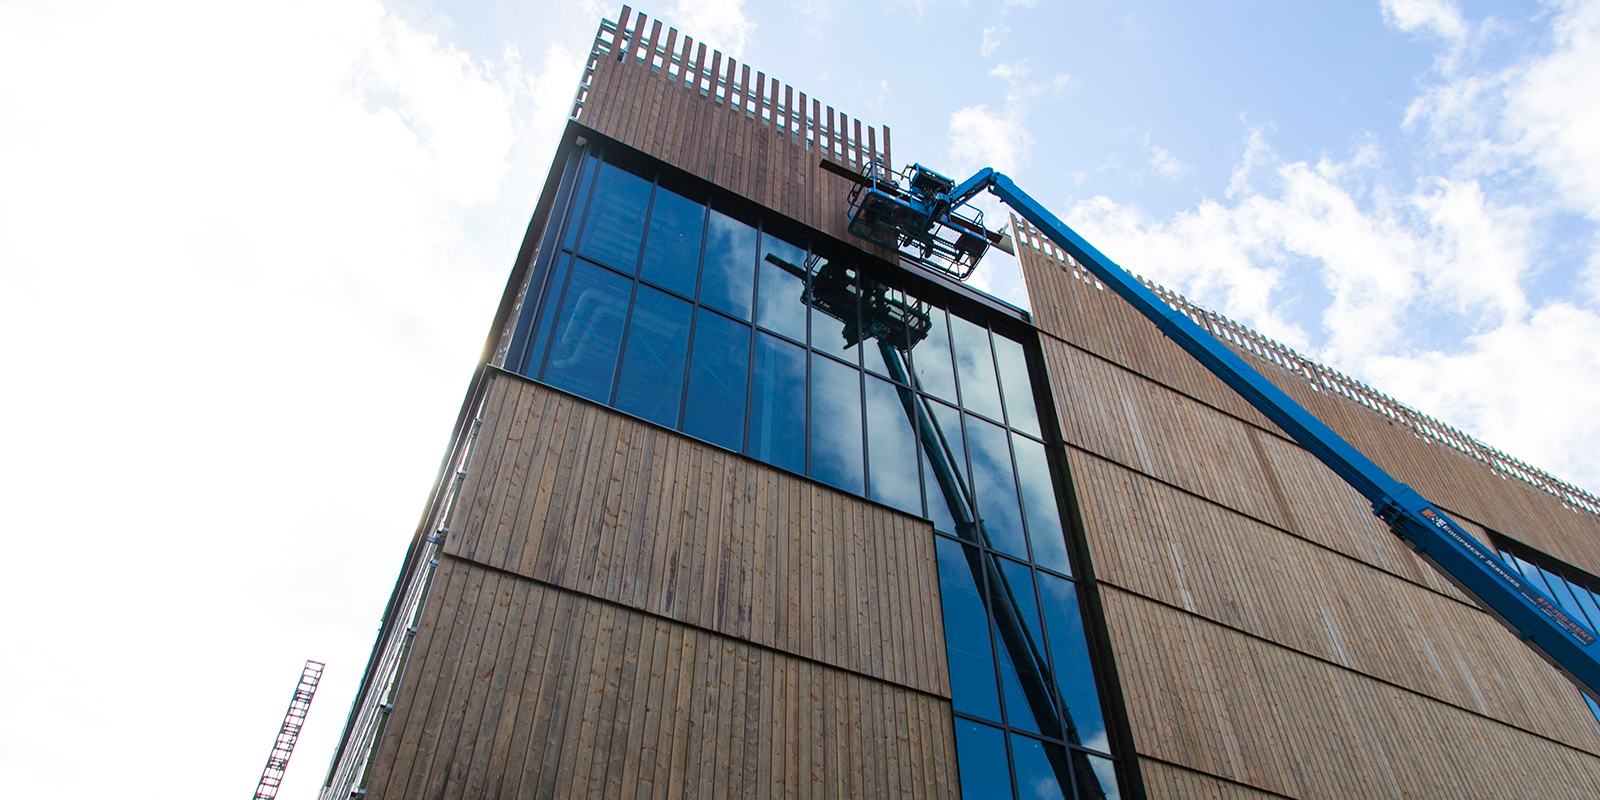 A crew member uses a lift to install siding with the lift reflecting in the glass